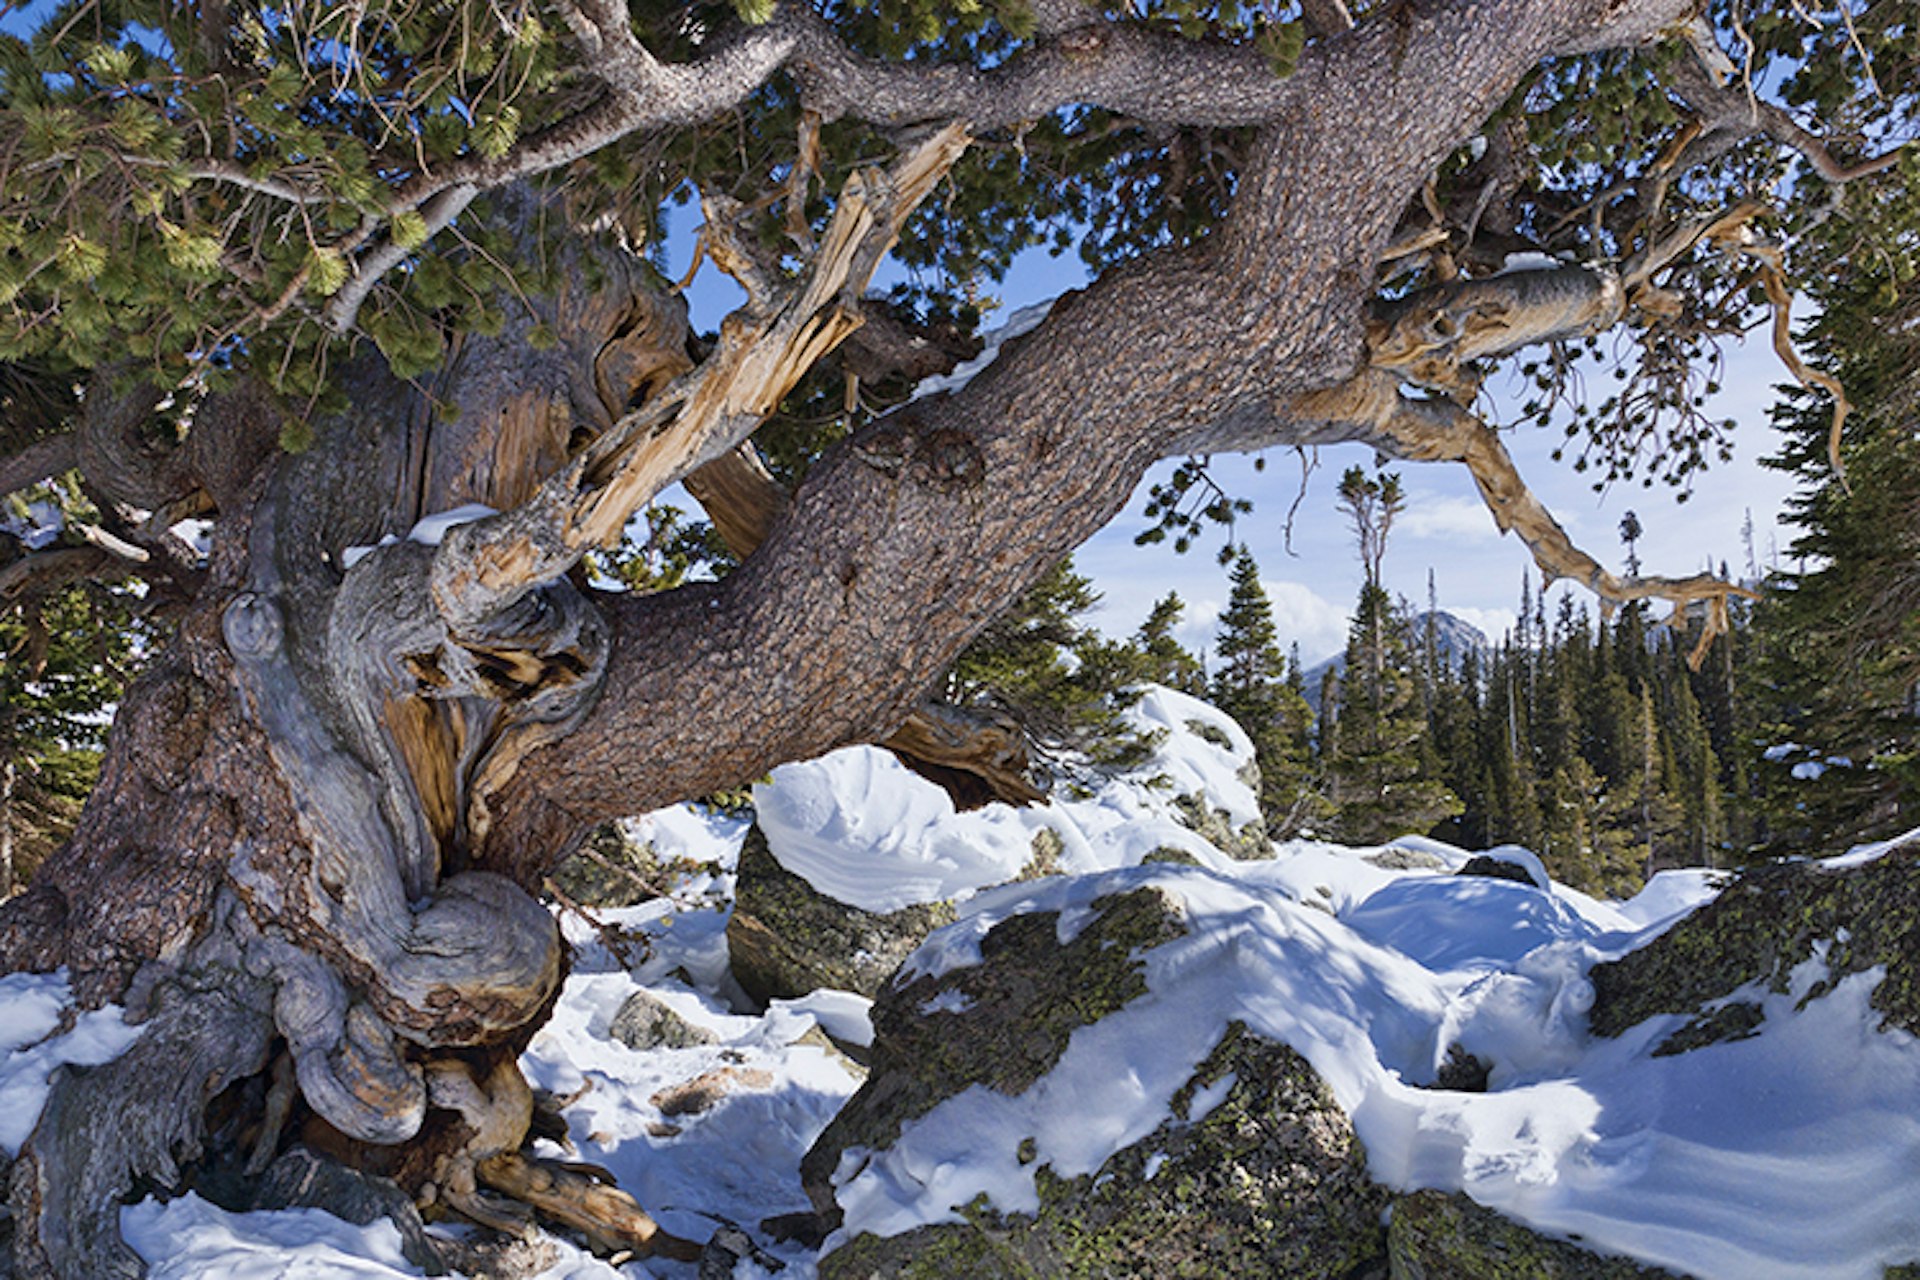 Ancient tree in Rocky Mountain National Park. Image by Steven Bratman / CC BY 2.0